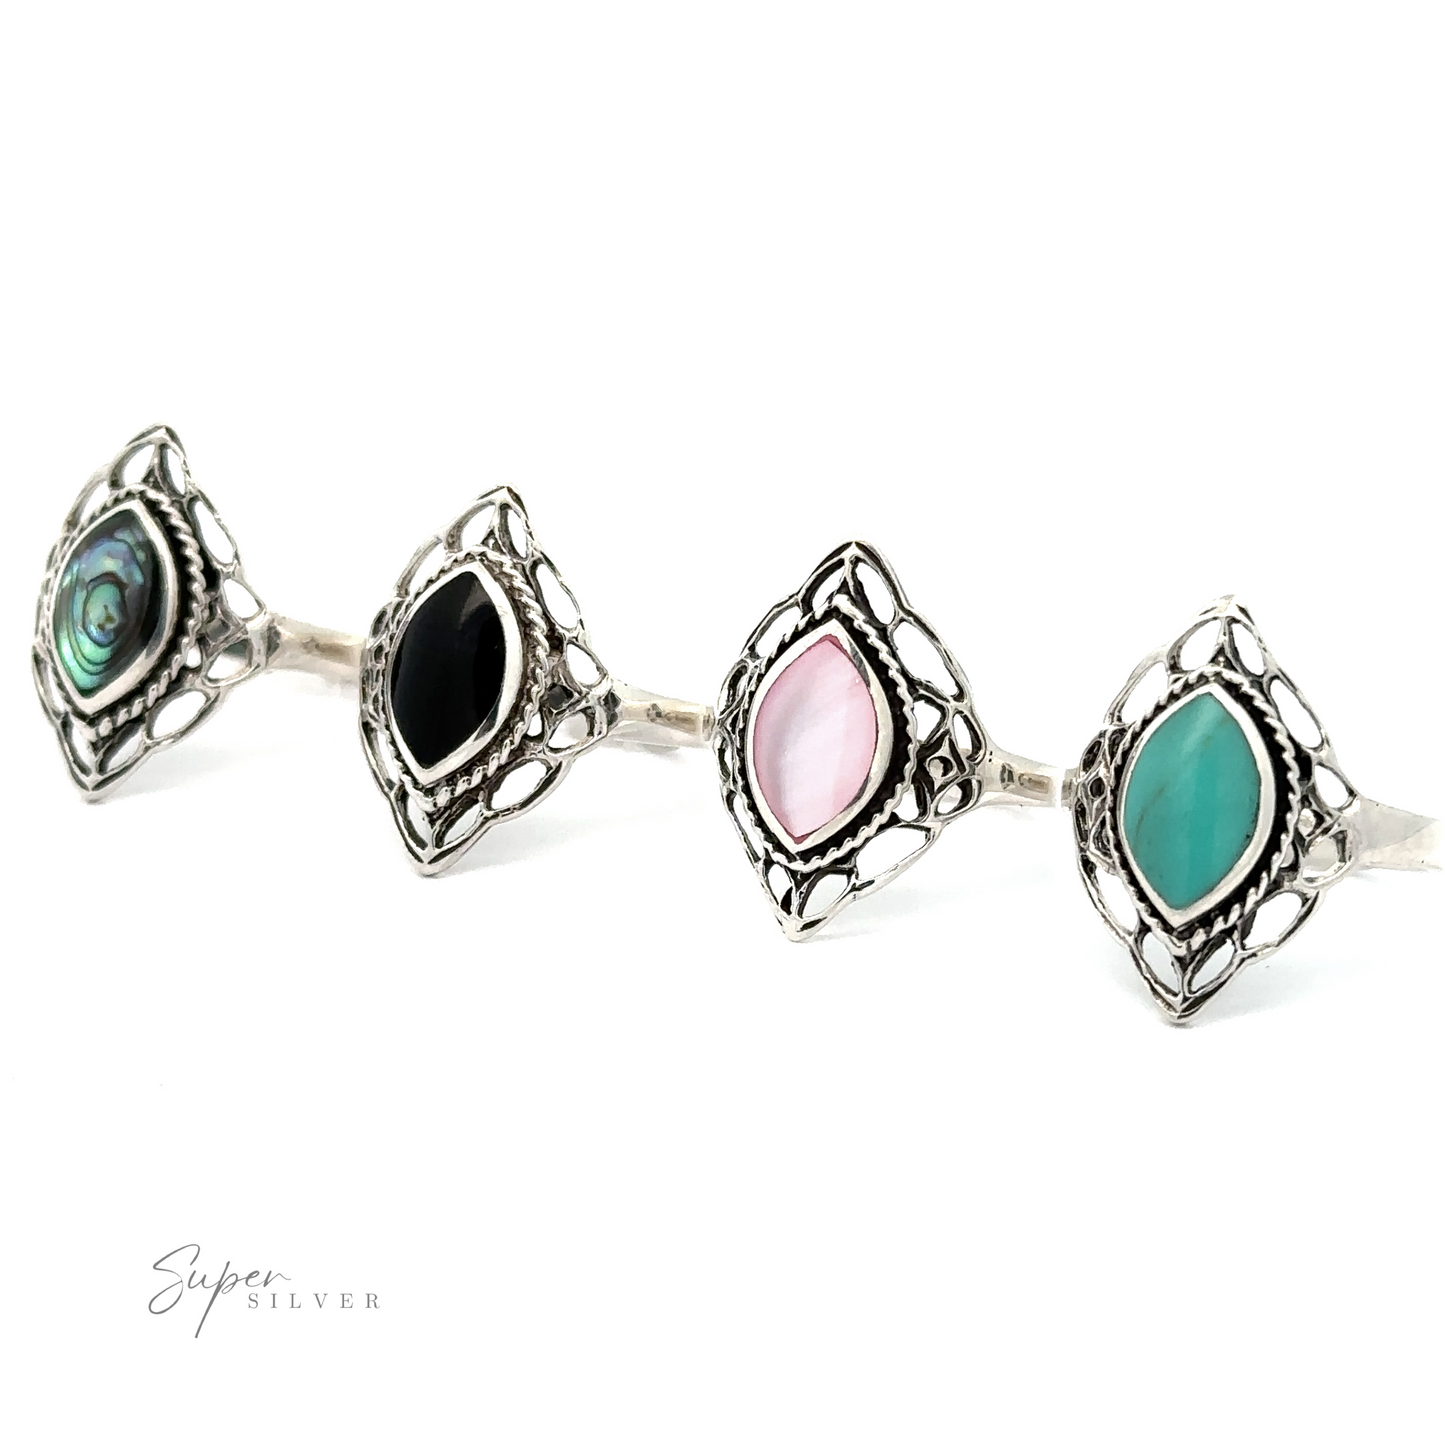 A row of Delicate Marquise Shield Rings with inlaid stones of different colors.